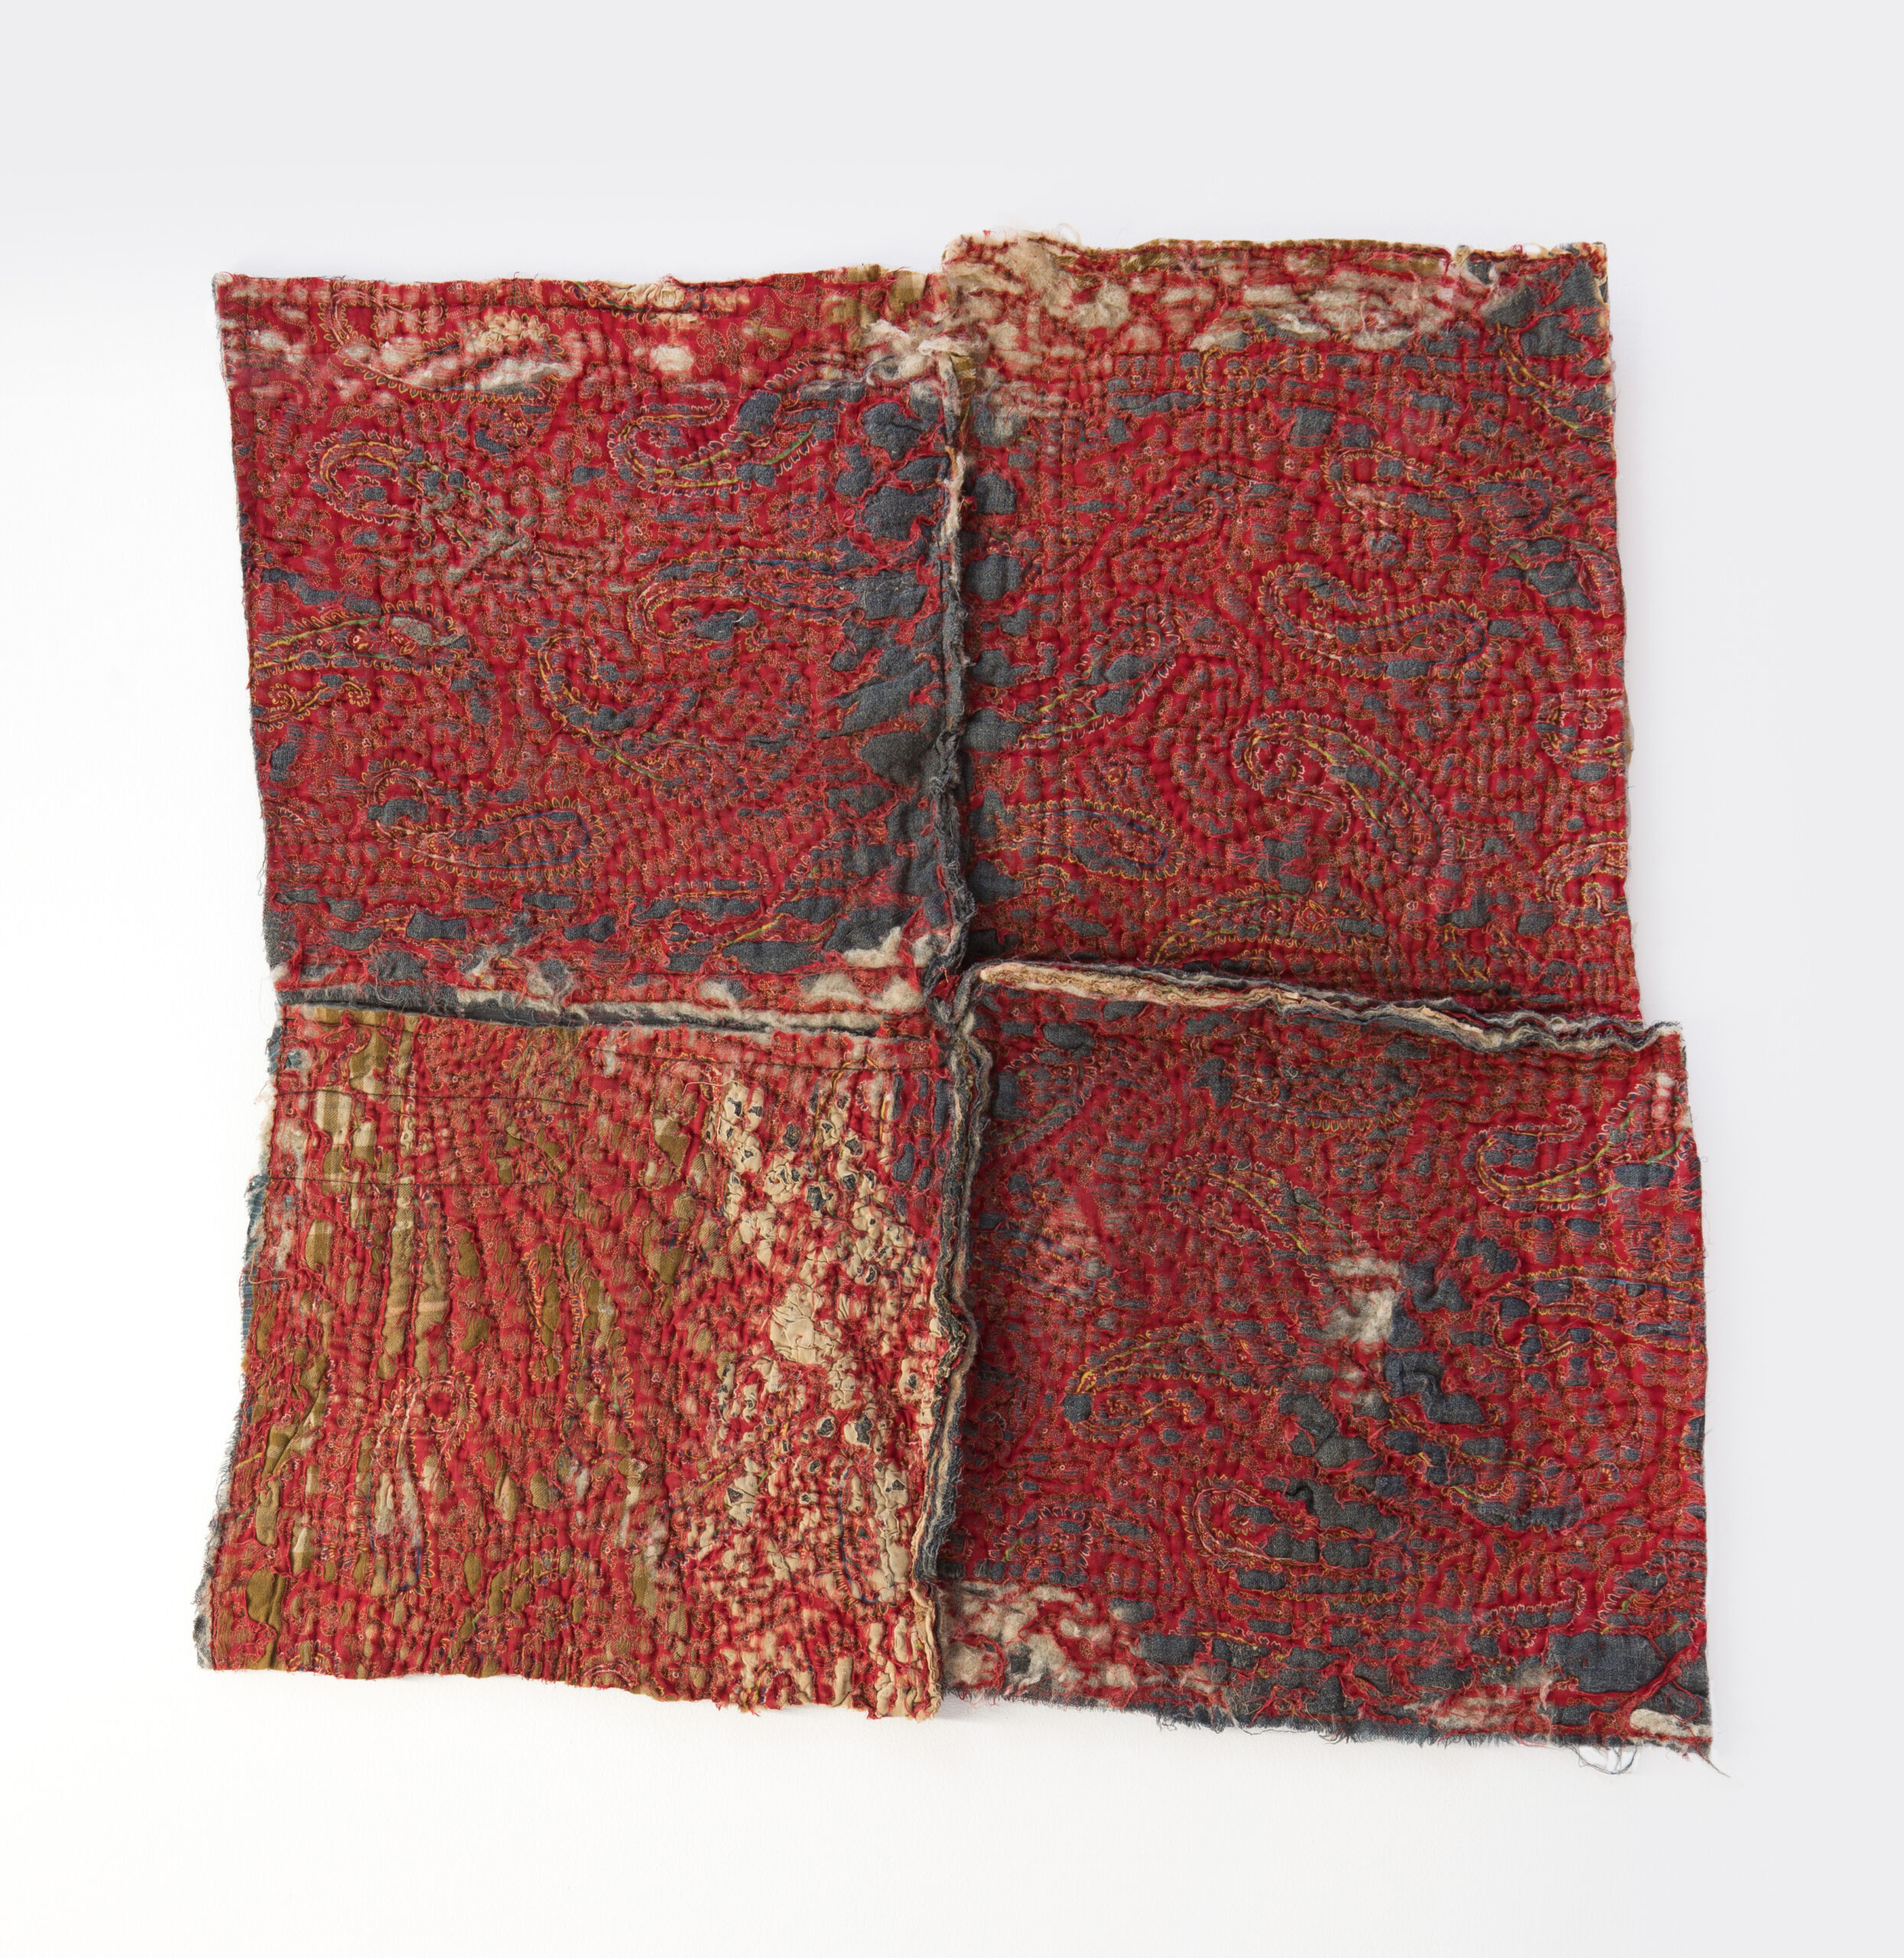 Maya Balcioglu: Untitled (Red quilt) (2021) Cotton embroidery and pva on cotton and wool, 90 cm x 86 cm.